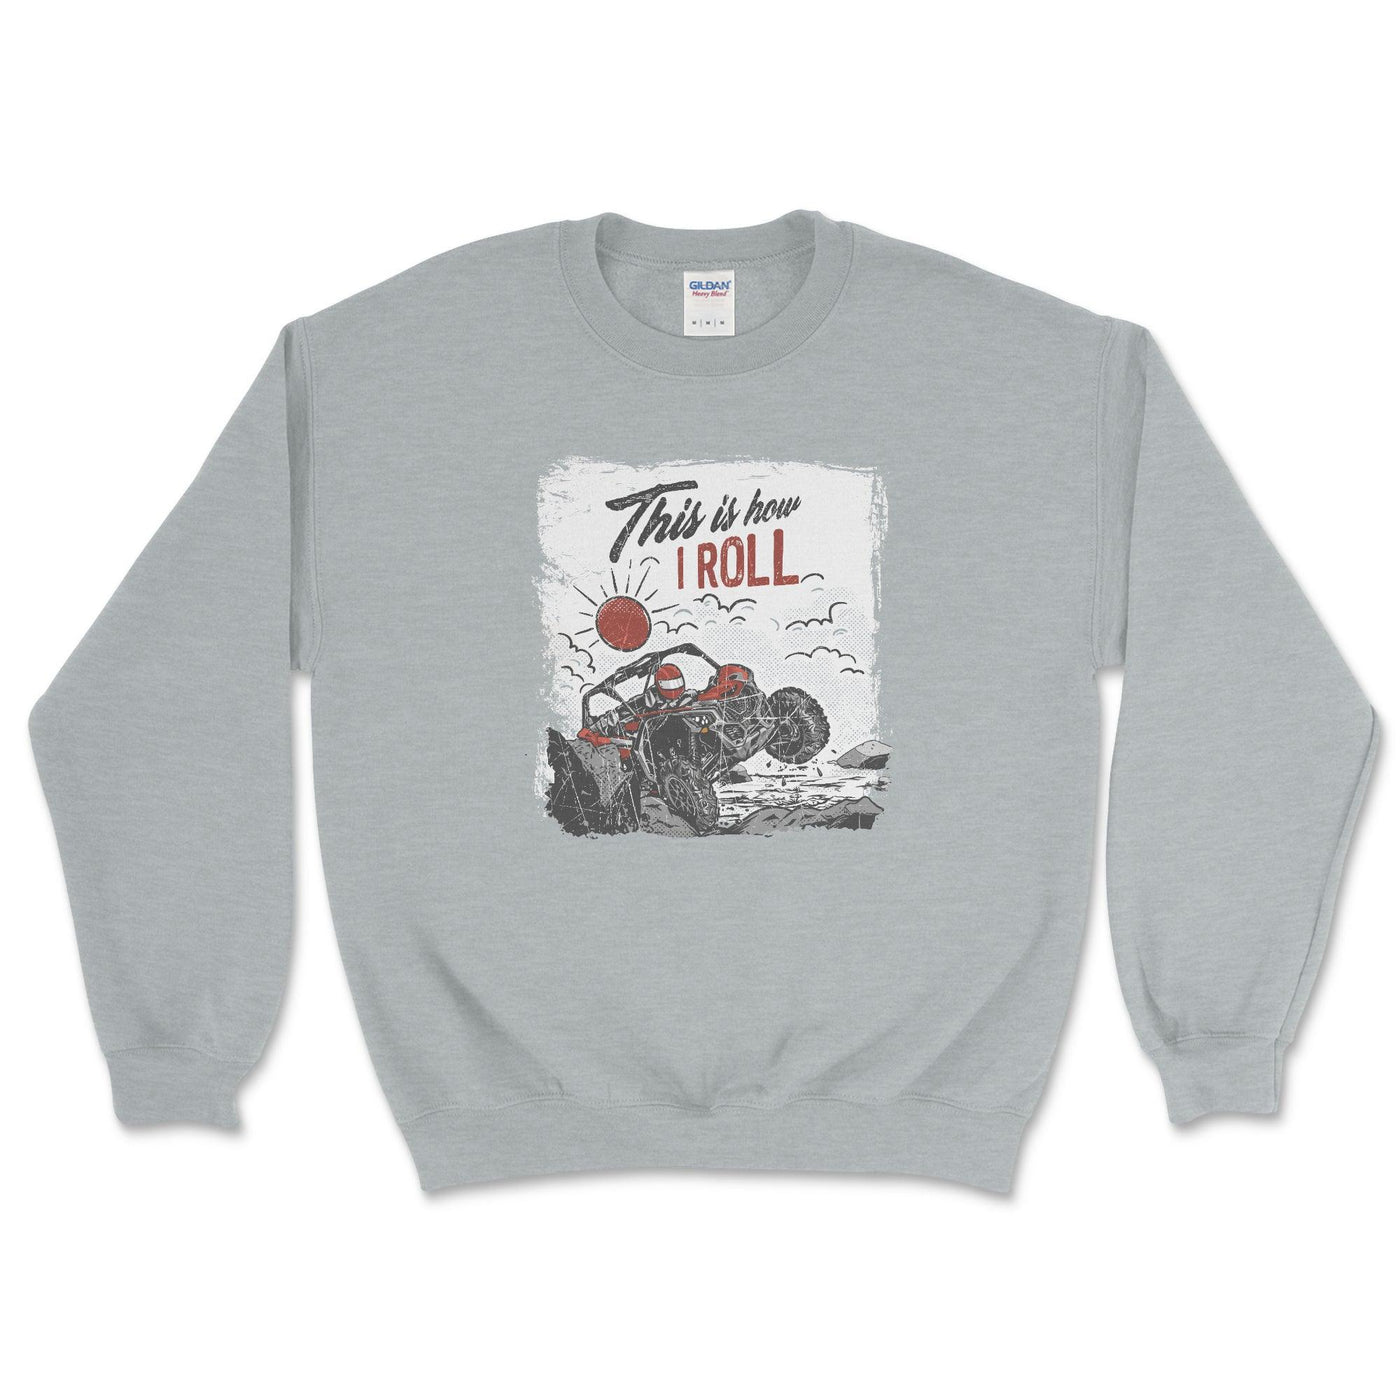 This is How I Roll Sweatshirt - Goats Trail